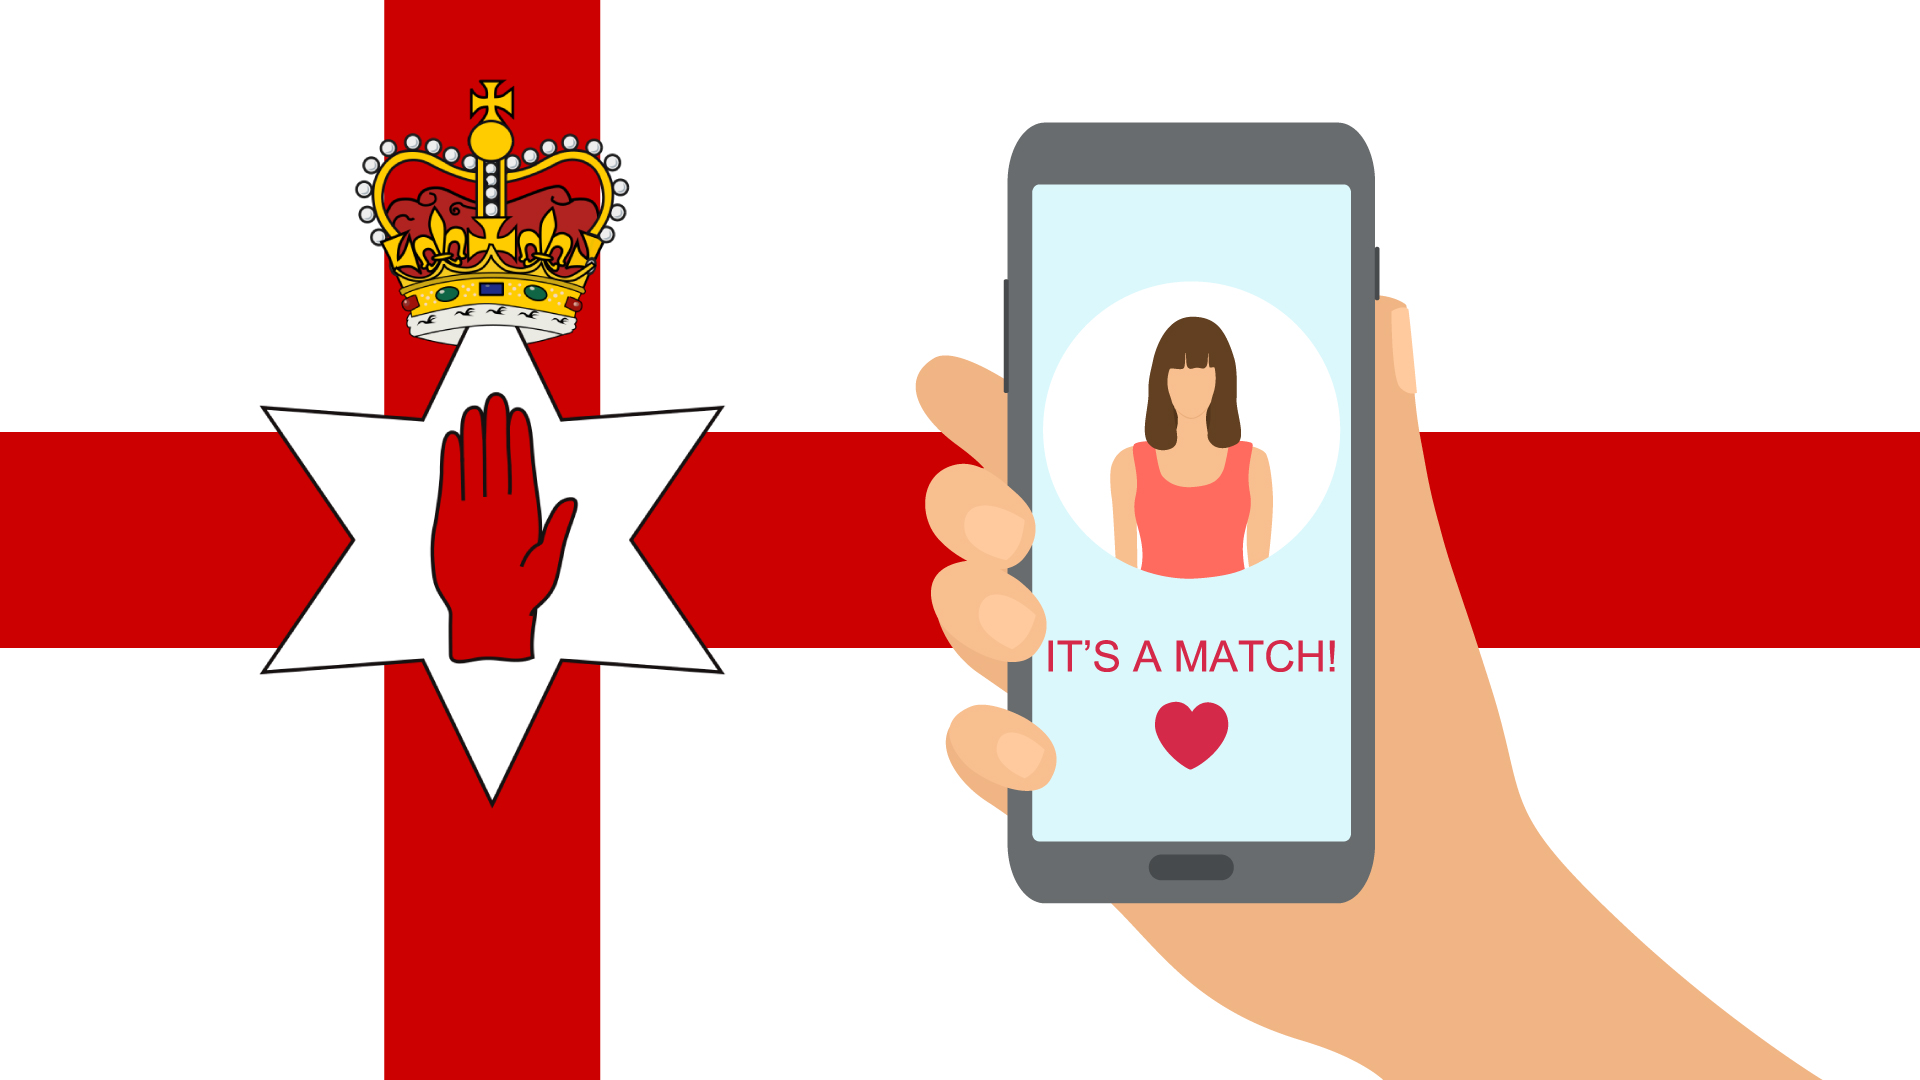 Cartoon hand holding phone in front of the flag of Northern Ireland. The screen shows a woman with the words "It's a match".